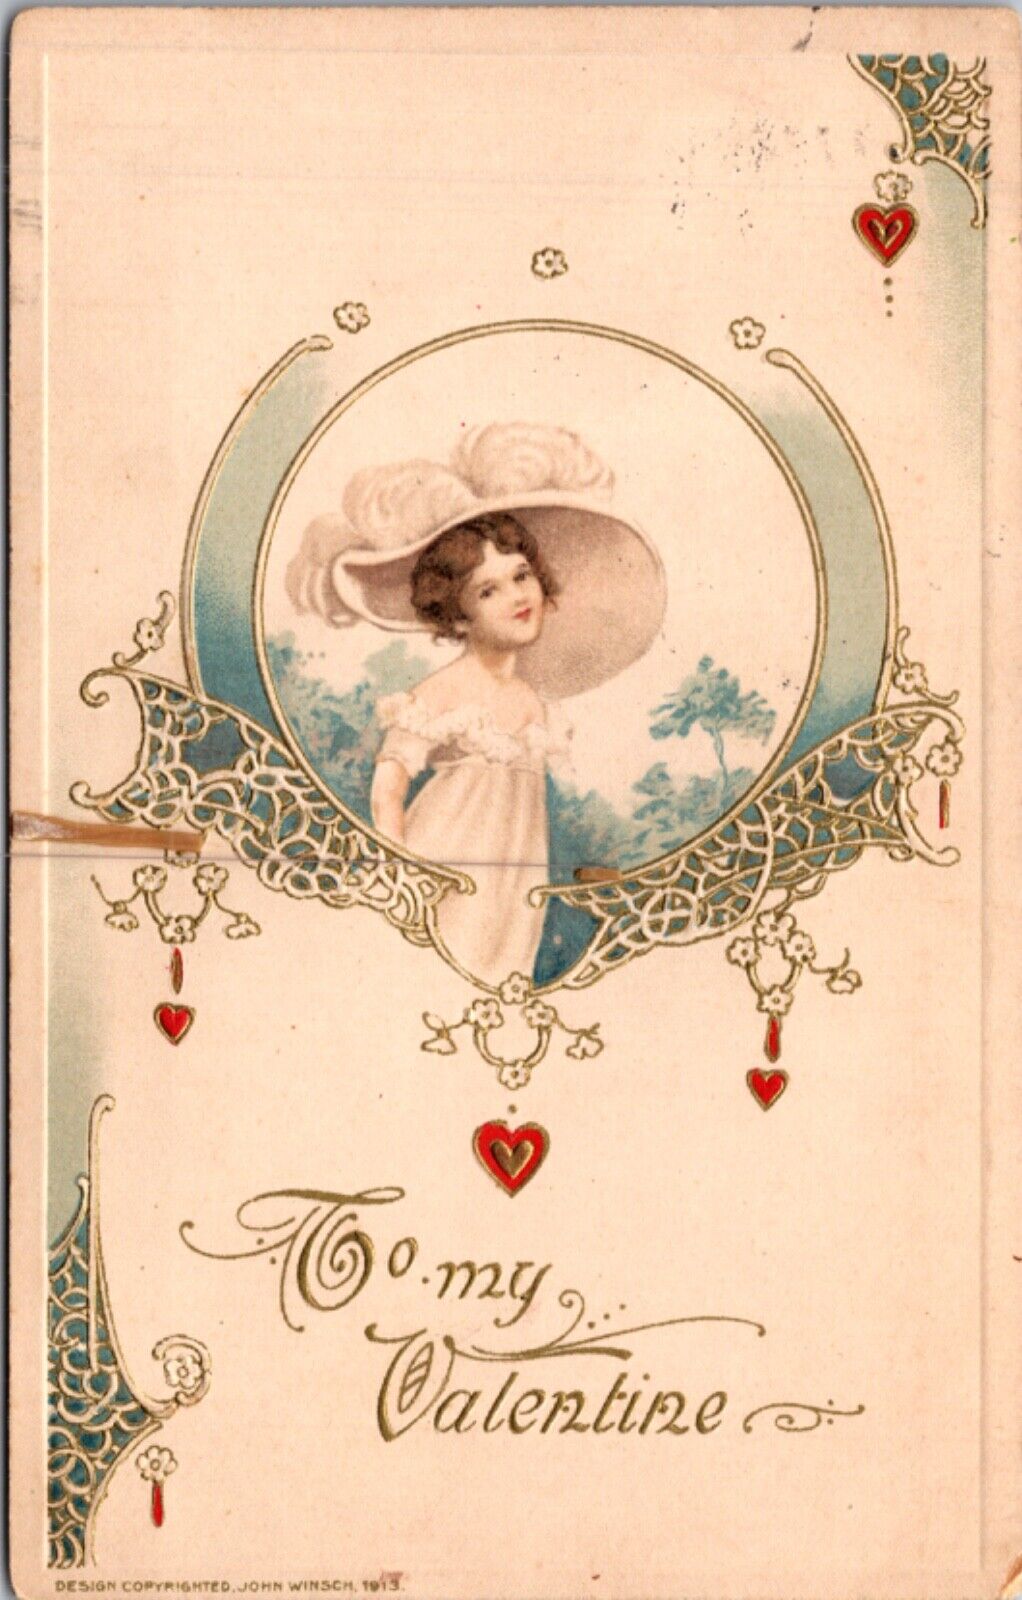 1913 Winsch Valentine Postcard Young Victorian Girl Large Feathered Hat Hearts